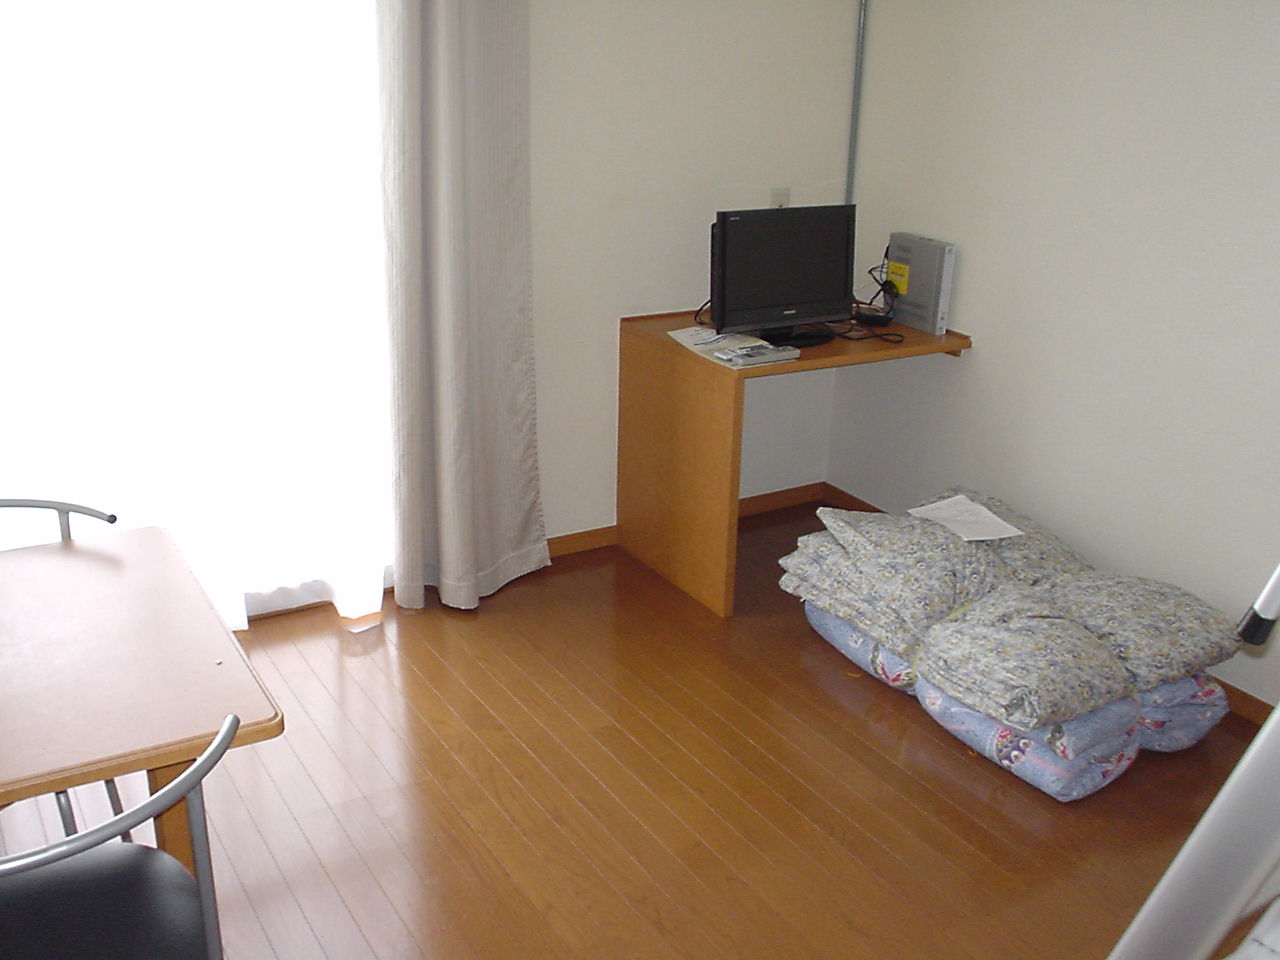 Living and room. Internet is also unlimited per month 1.645 yen.